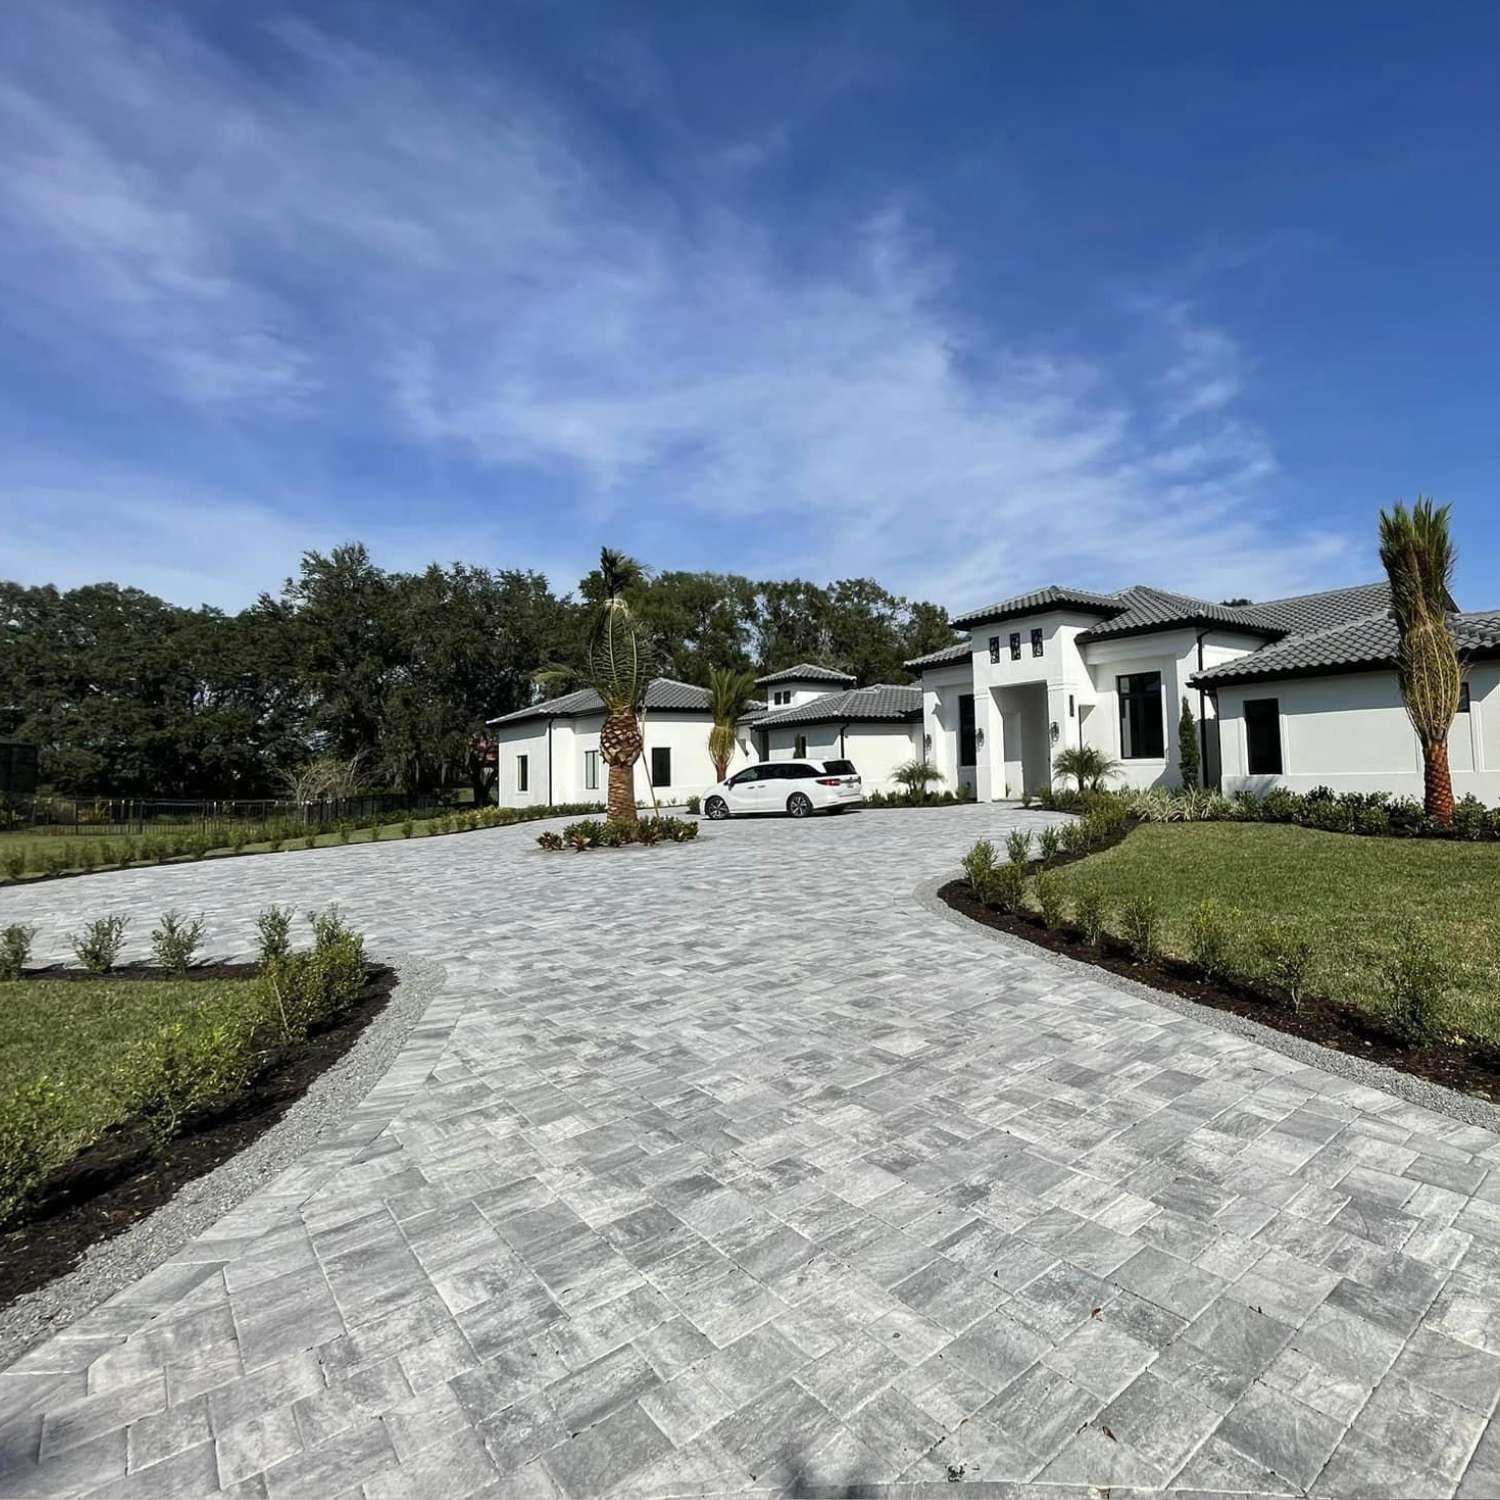 Tampa Driveway Paver Project